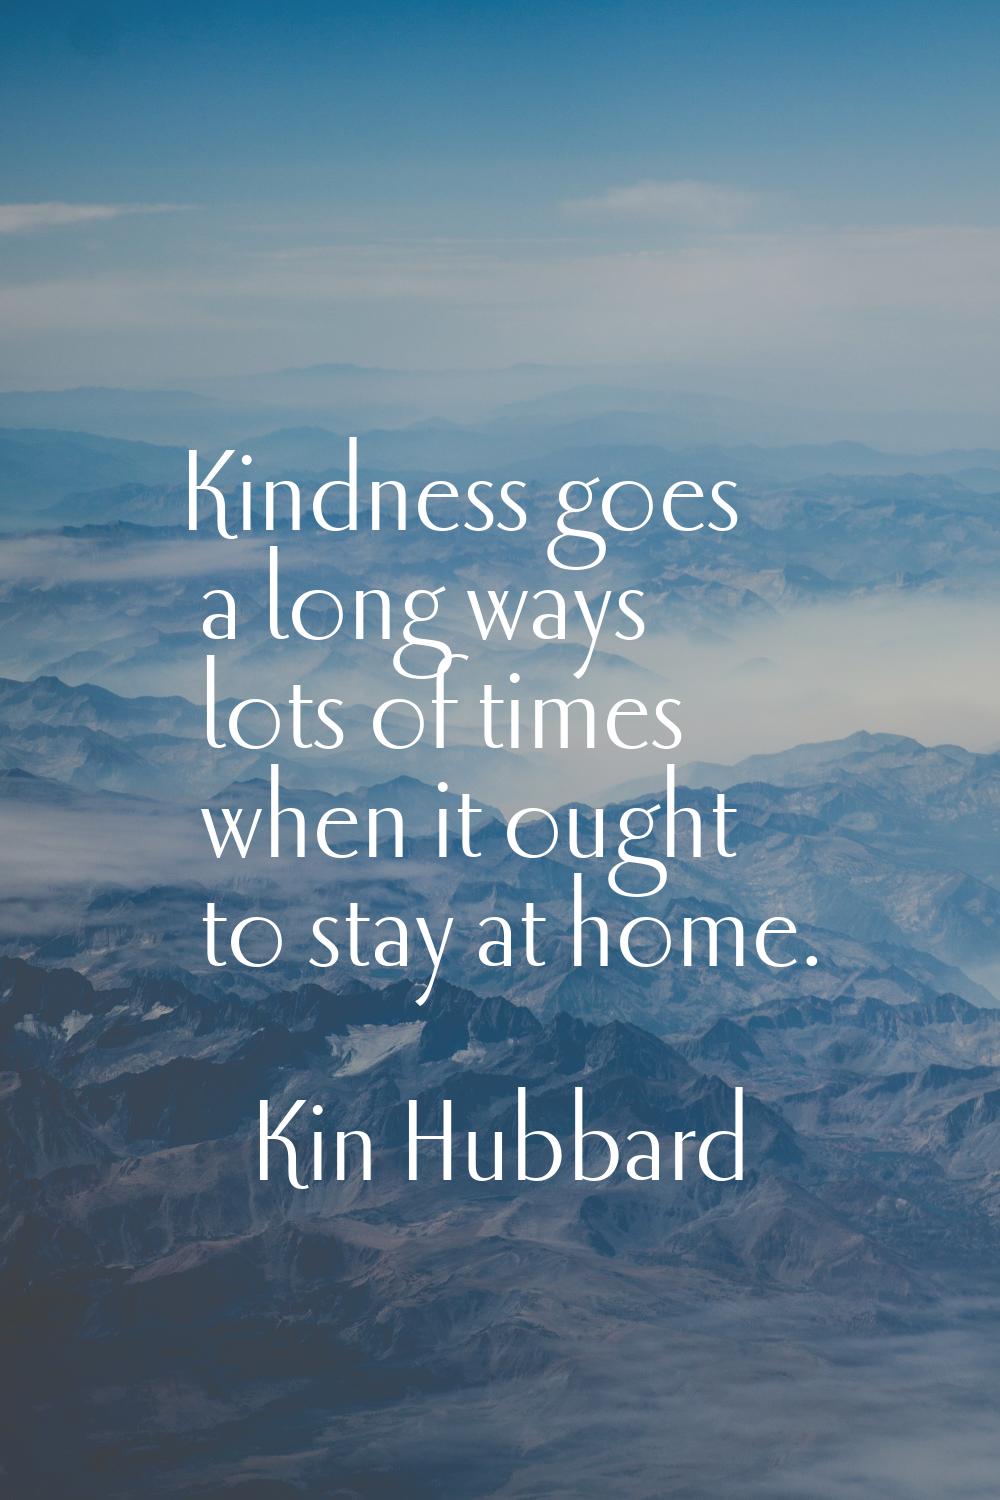 Kindness goes a long ways lots of times when it ought to stay at home.